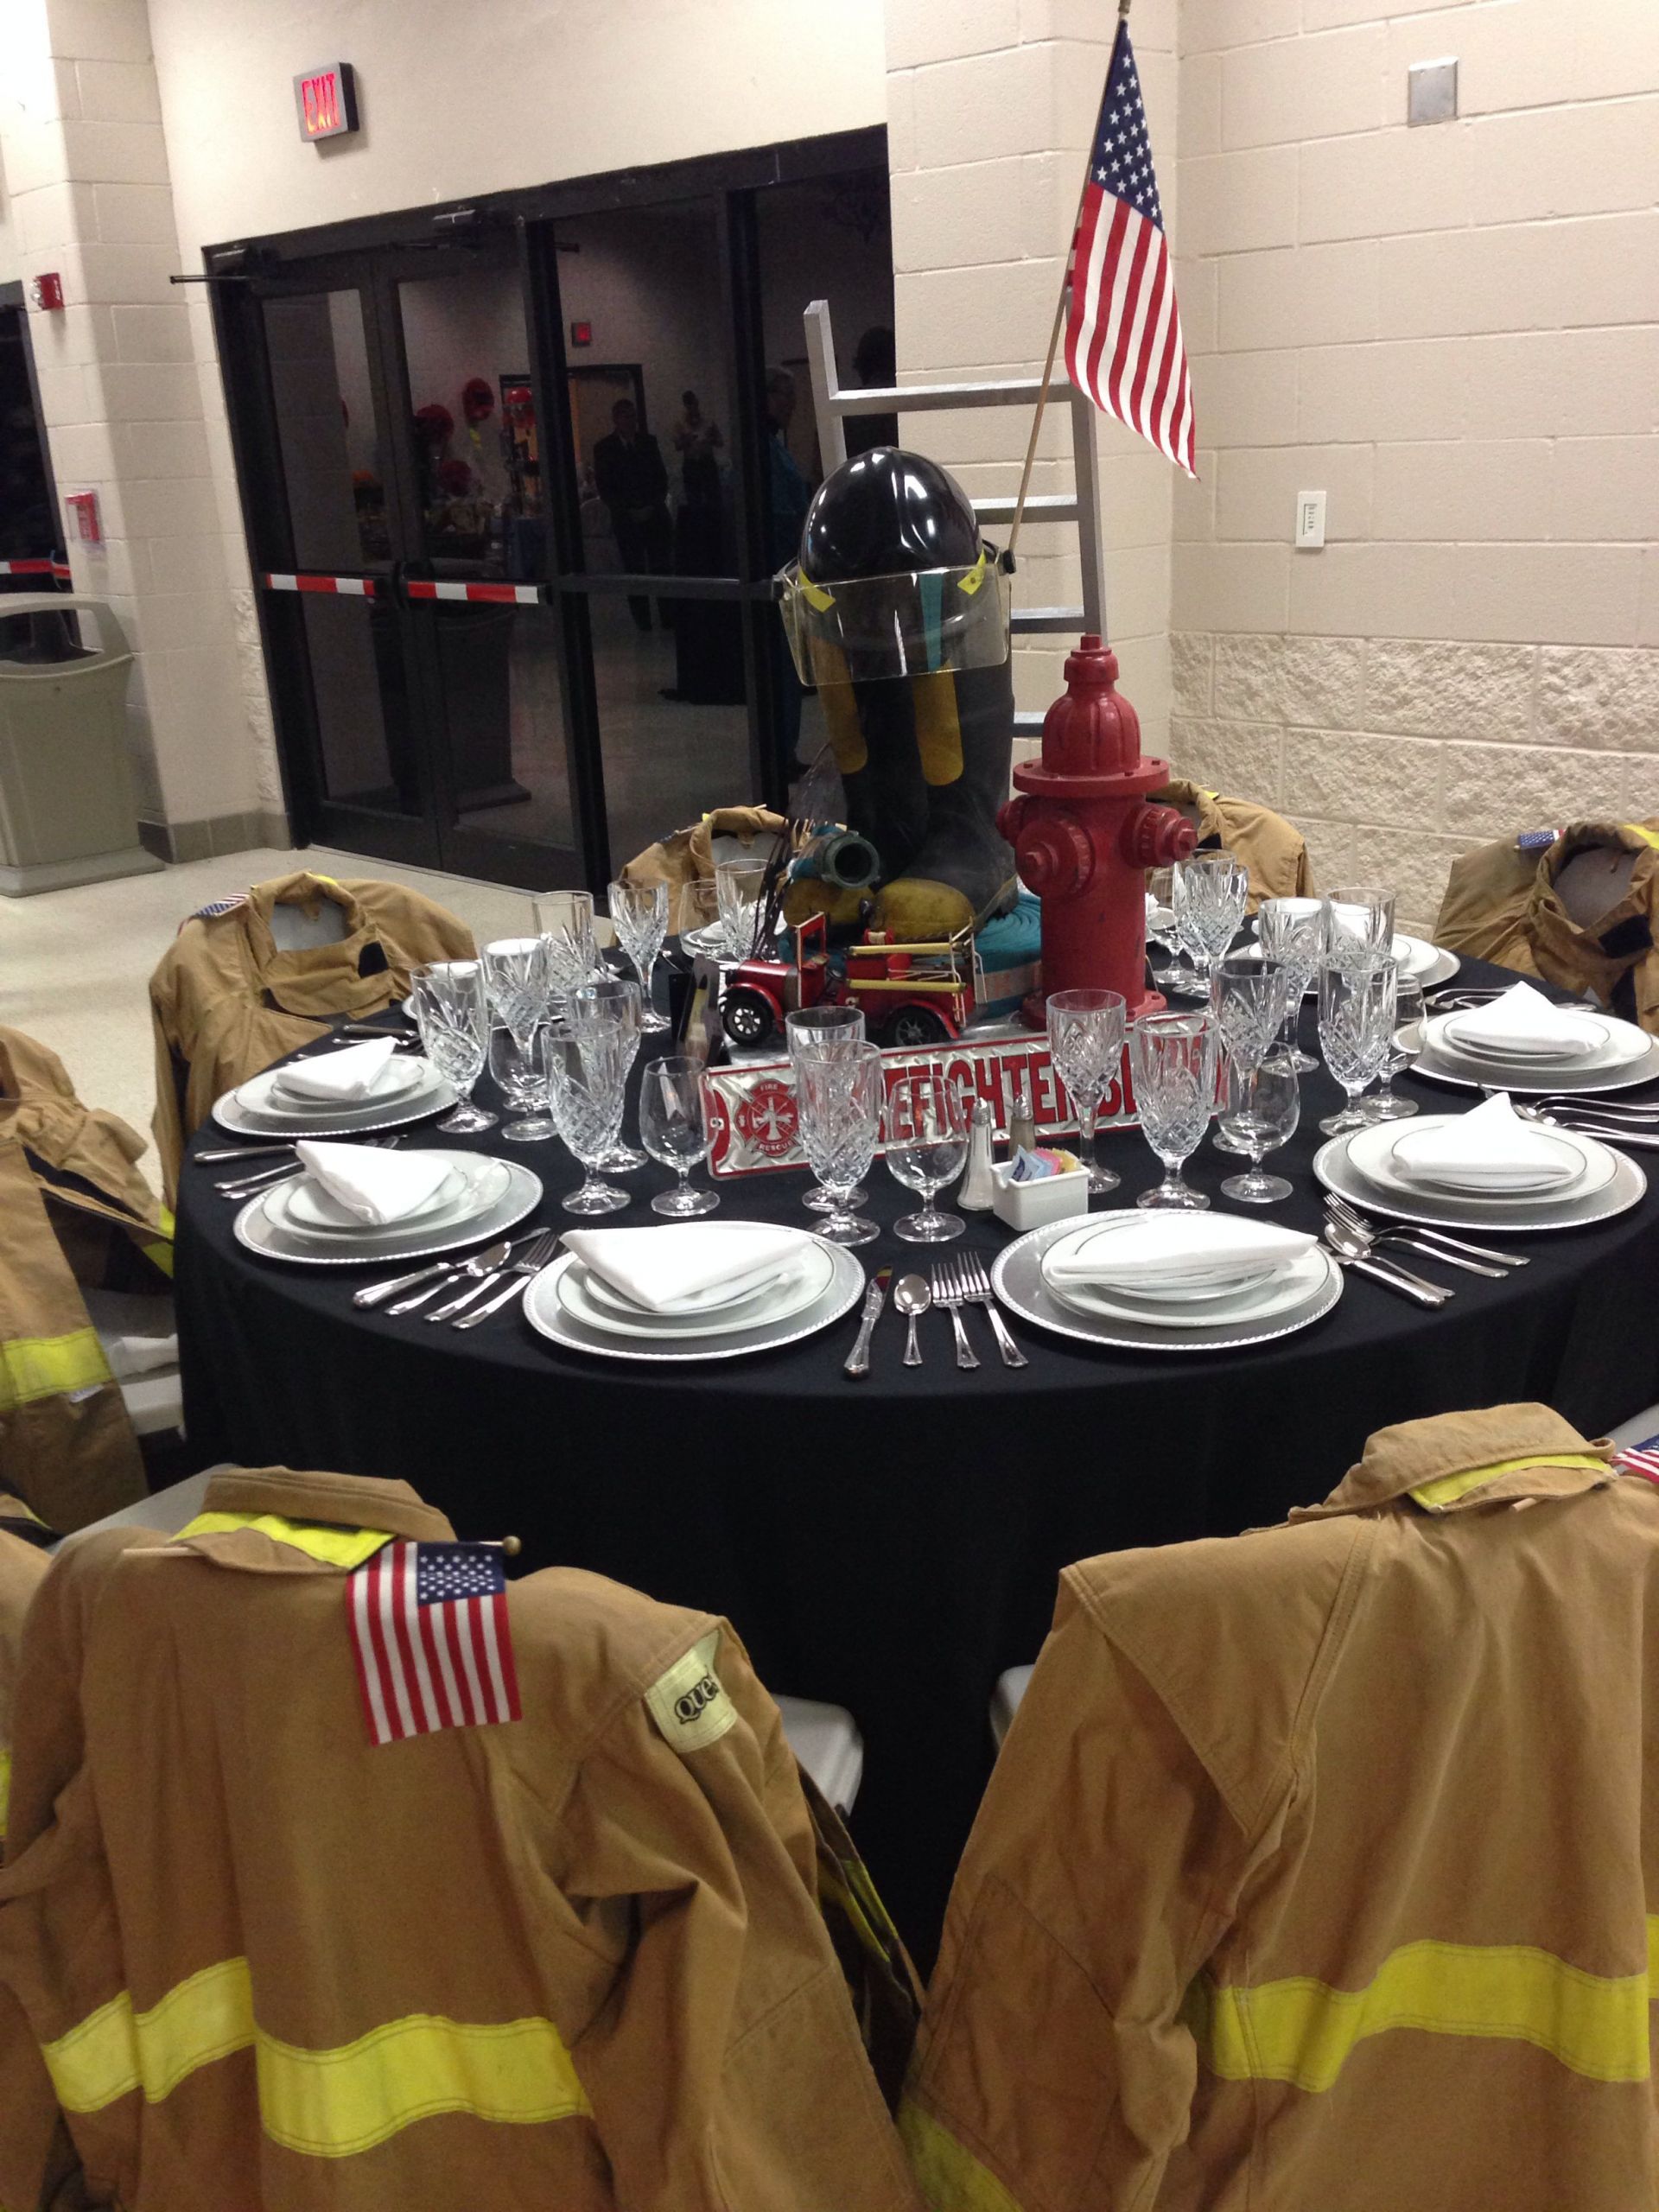 Firefighter Retirement Party Ideas
 We could do something like this for the banquet next year